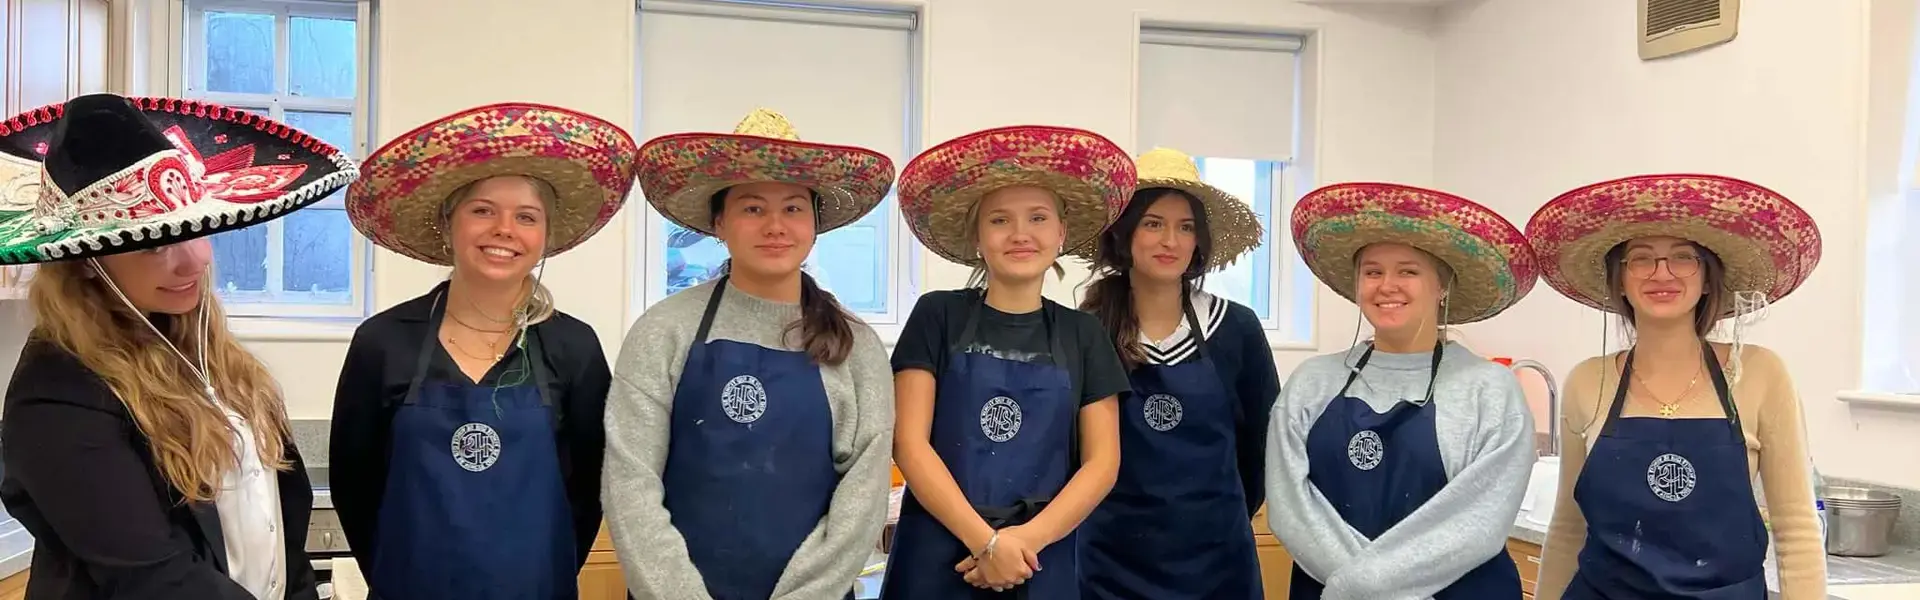 At Ibstock Place School, Roehampton, Lower Sixth Form Spanish classes joined together to cook up a feast of Hispanic specialities.